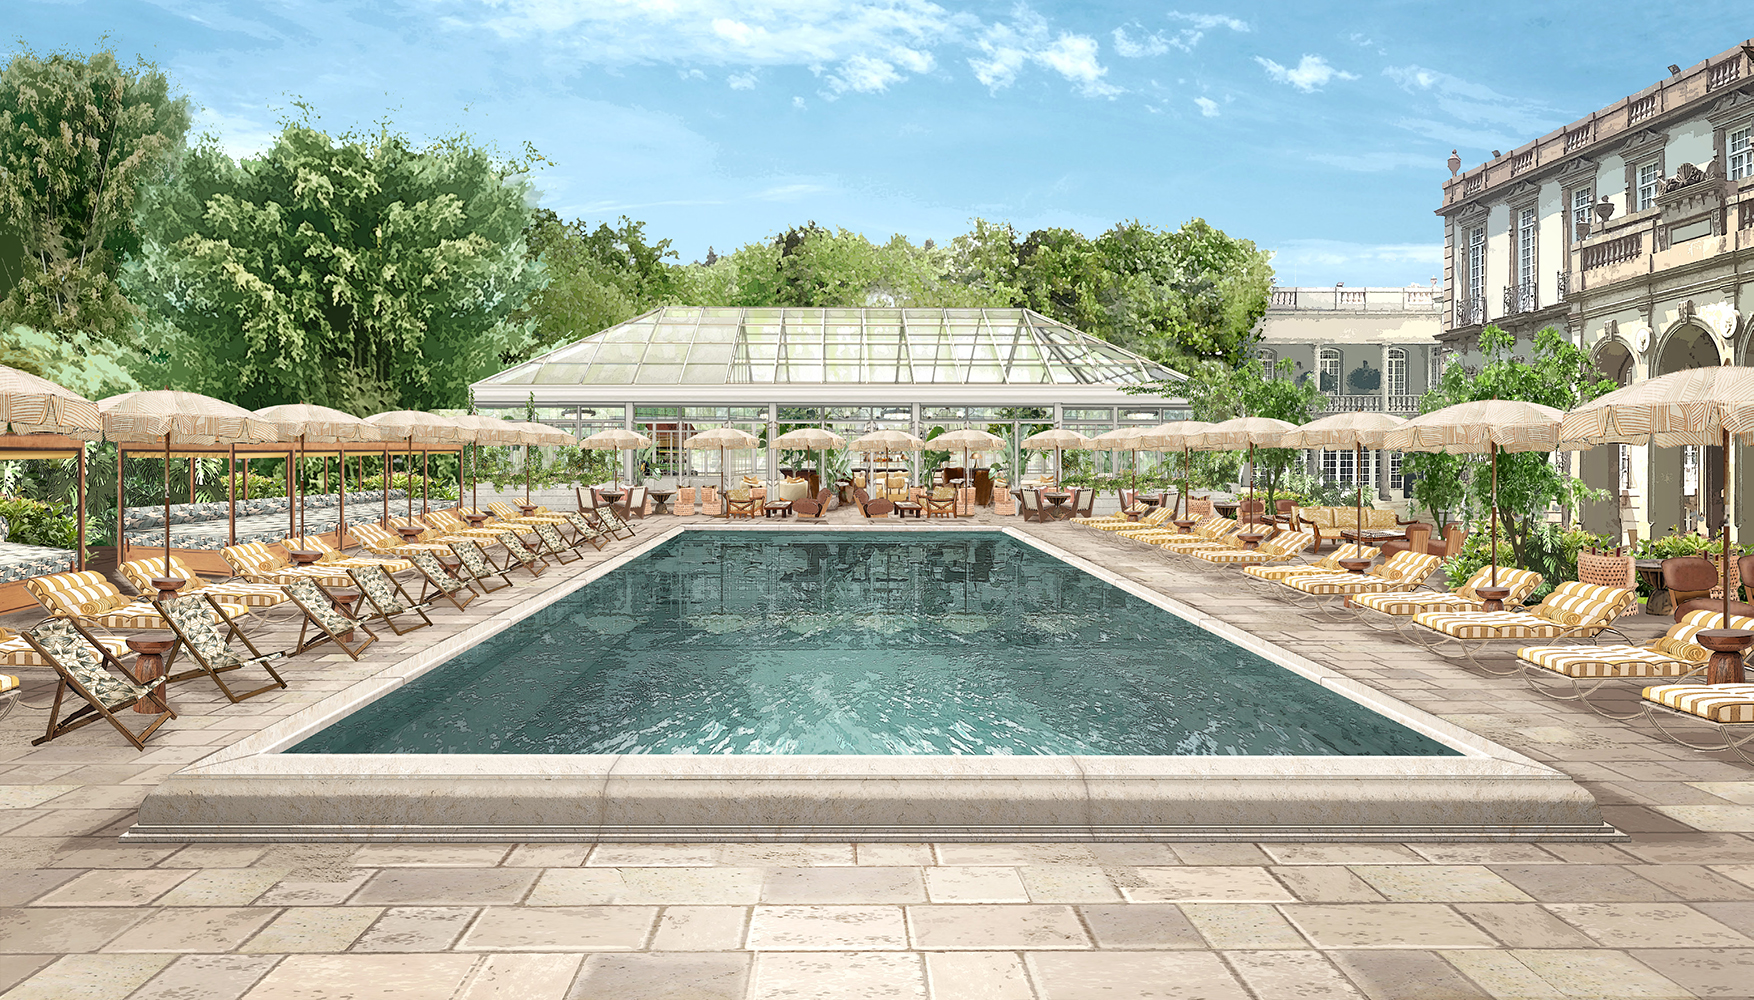 The Mexico City SoHo House grounds will be anchored by an outdoor pool